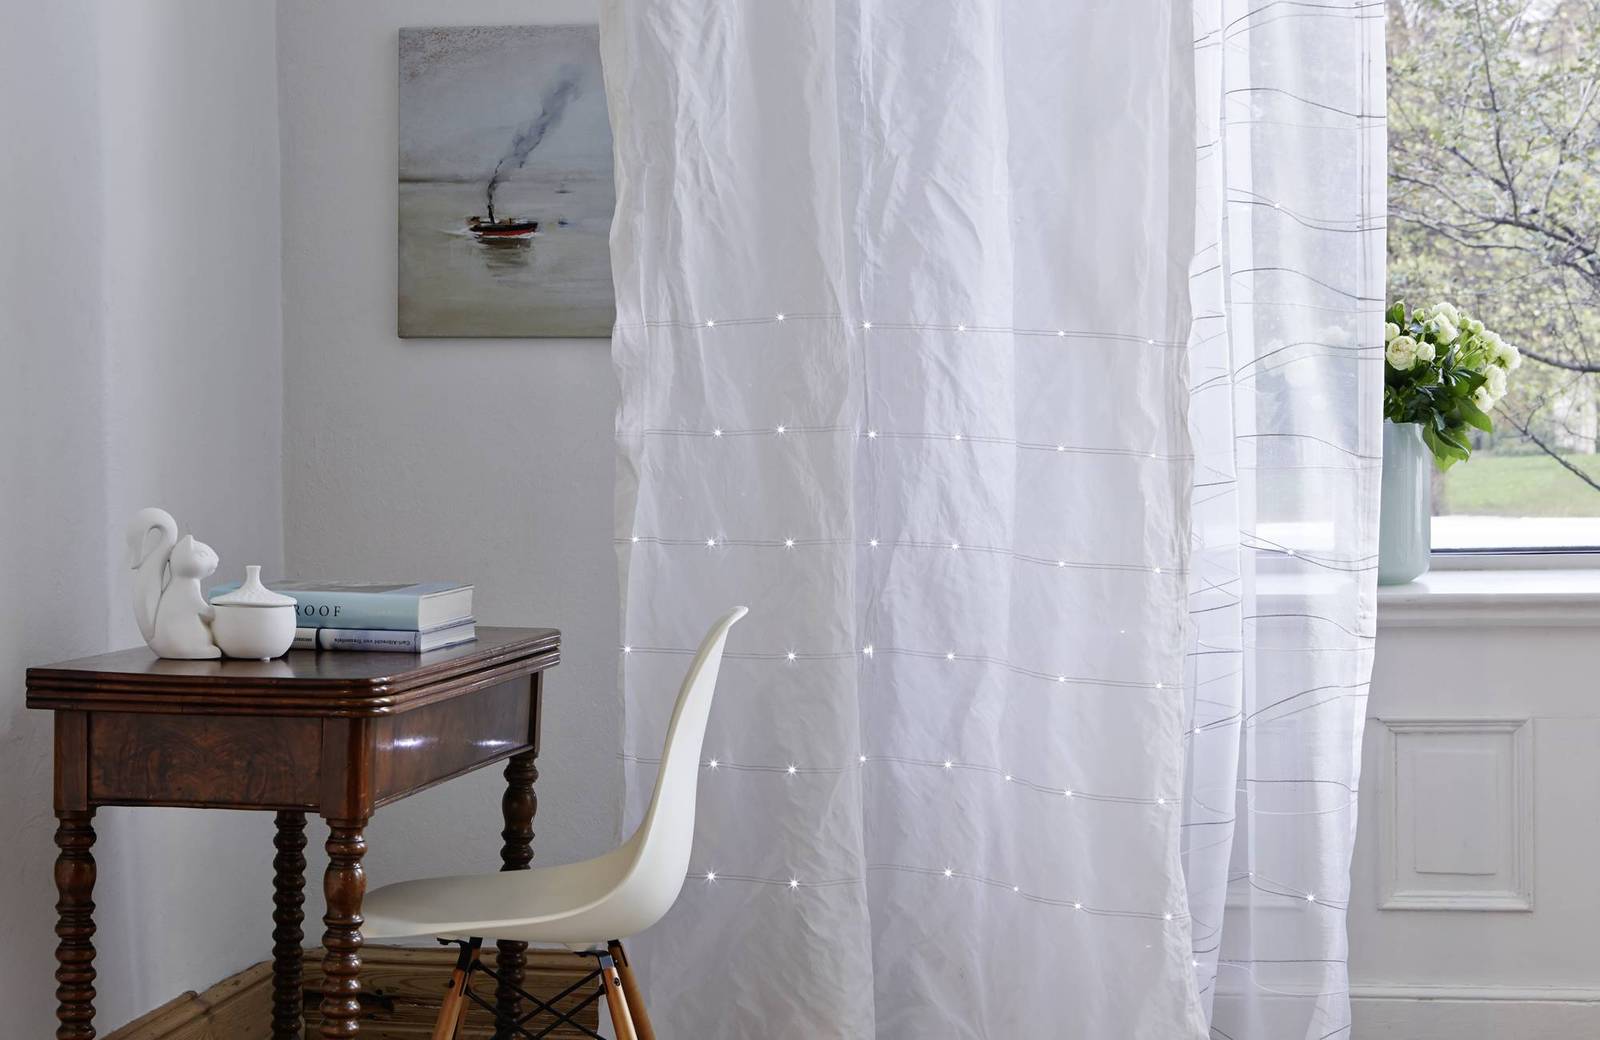 curtains-with-led-Lights-take-window-coverings-to-new-level-2.jpg